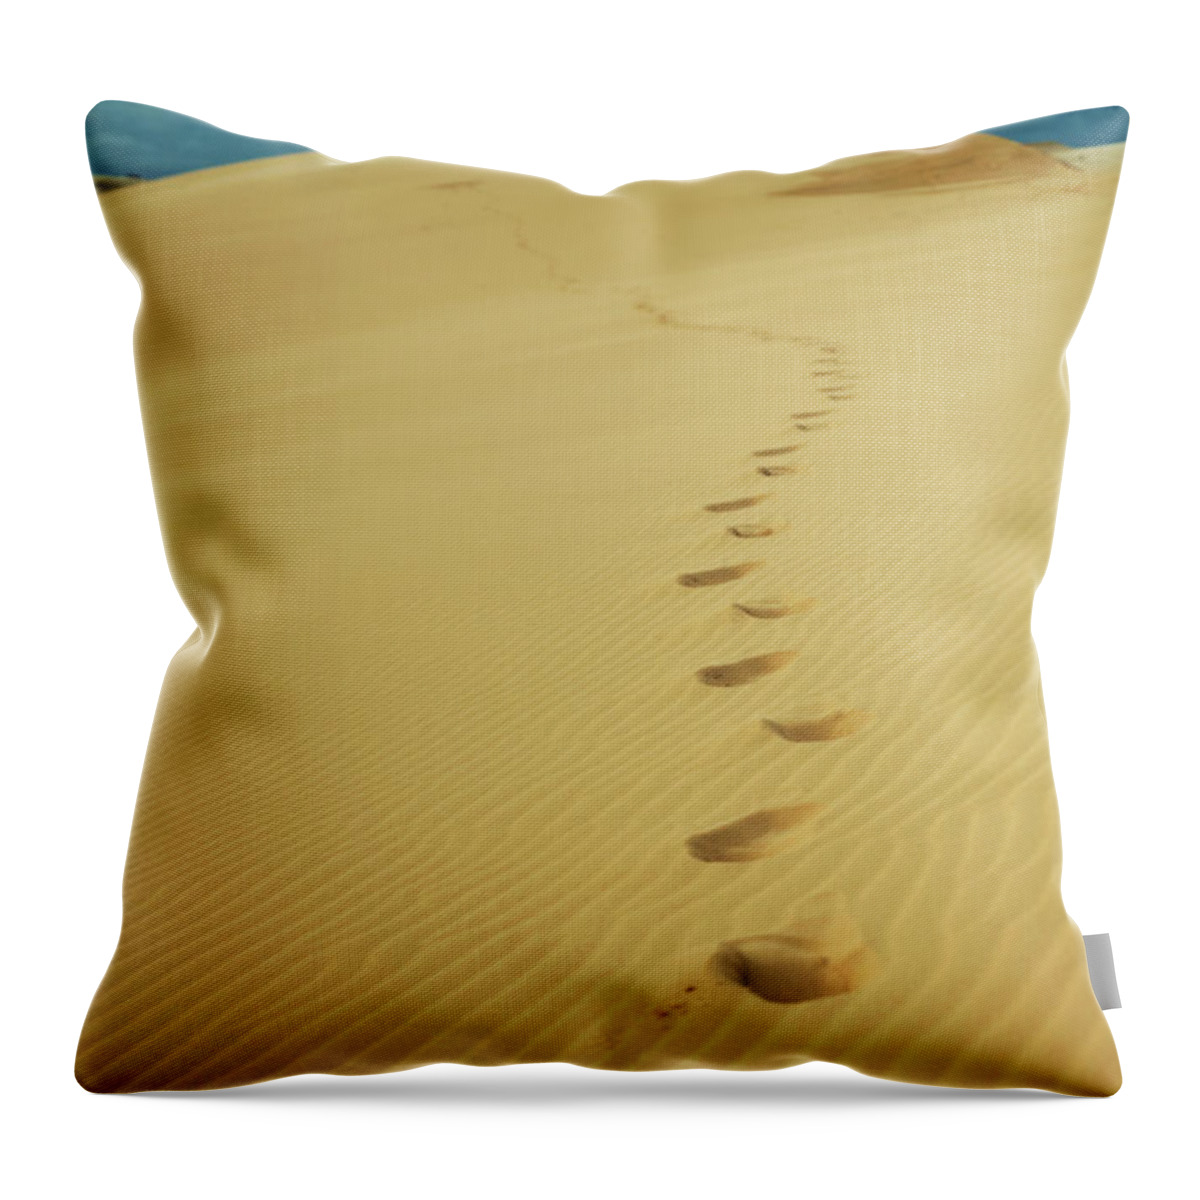 Tranquility Throw Pillow featuring the photograph Vietnam..3 by Yoon Byeong Seok Photography